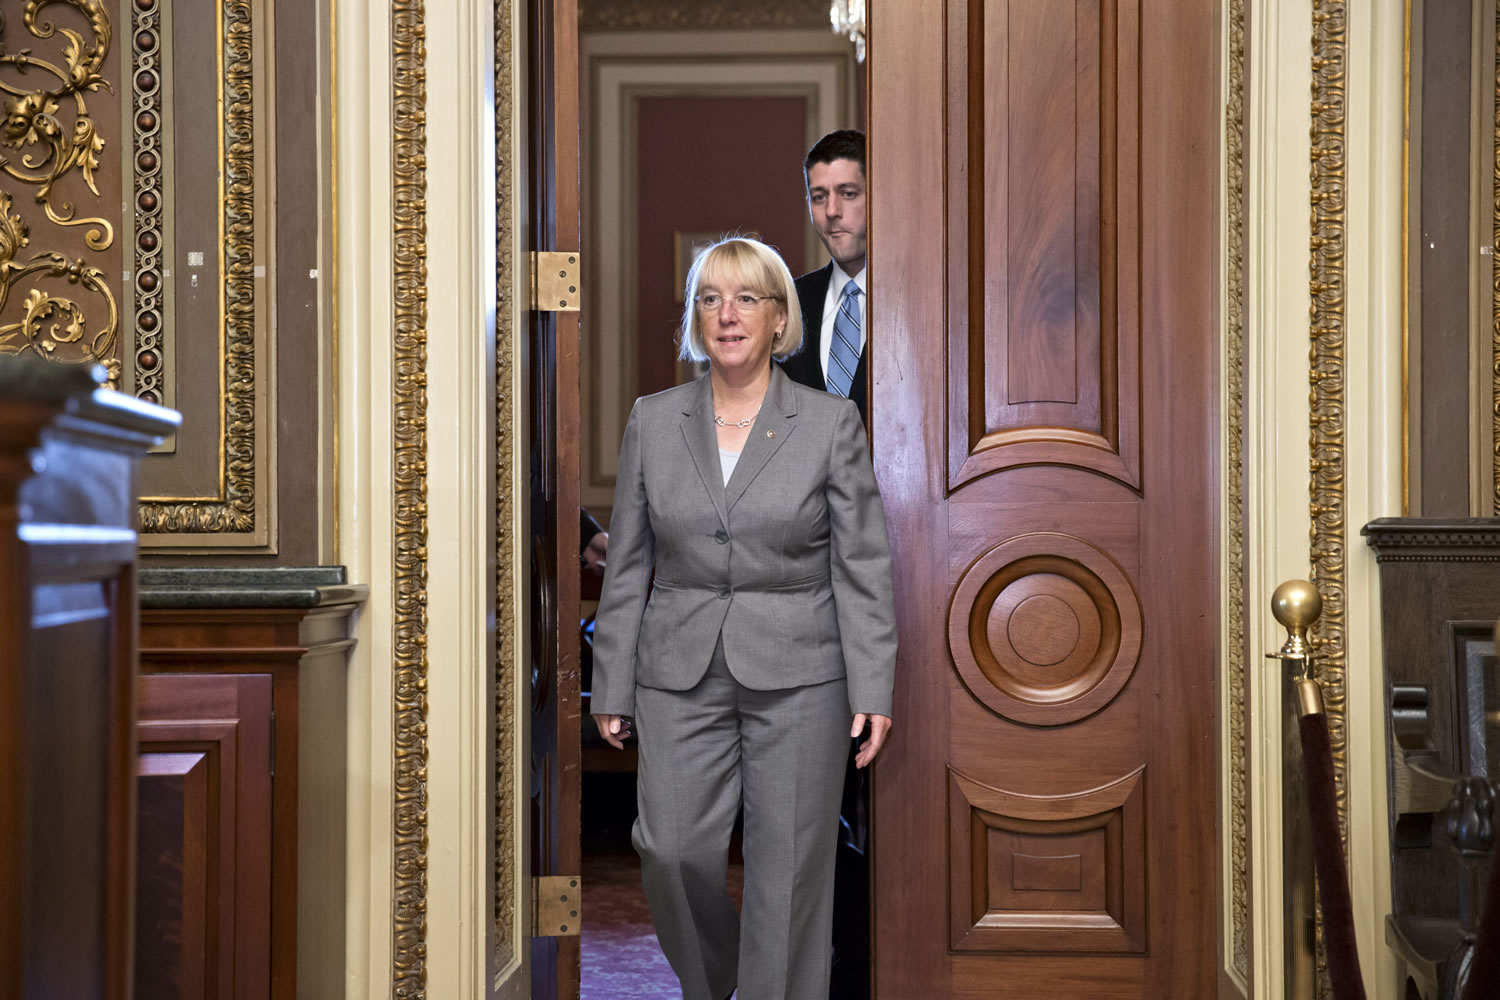 Senate Budget Committee Chair Patty Murray, D-Wash., and House Budget Committee Chairman Paul Ryan, R-Wis., emerge from an initial meeting of the bipartisan budget conferees from both houses of Congress on Thursday in Washington.